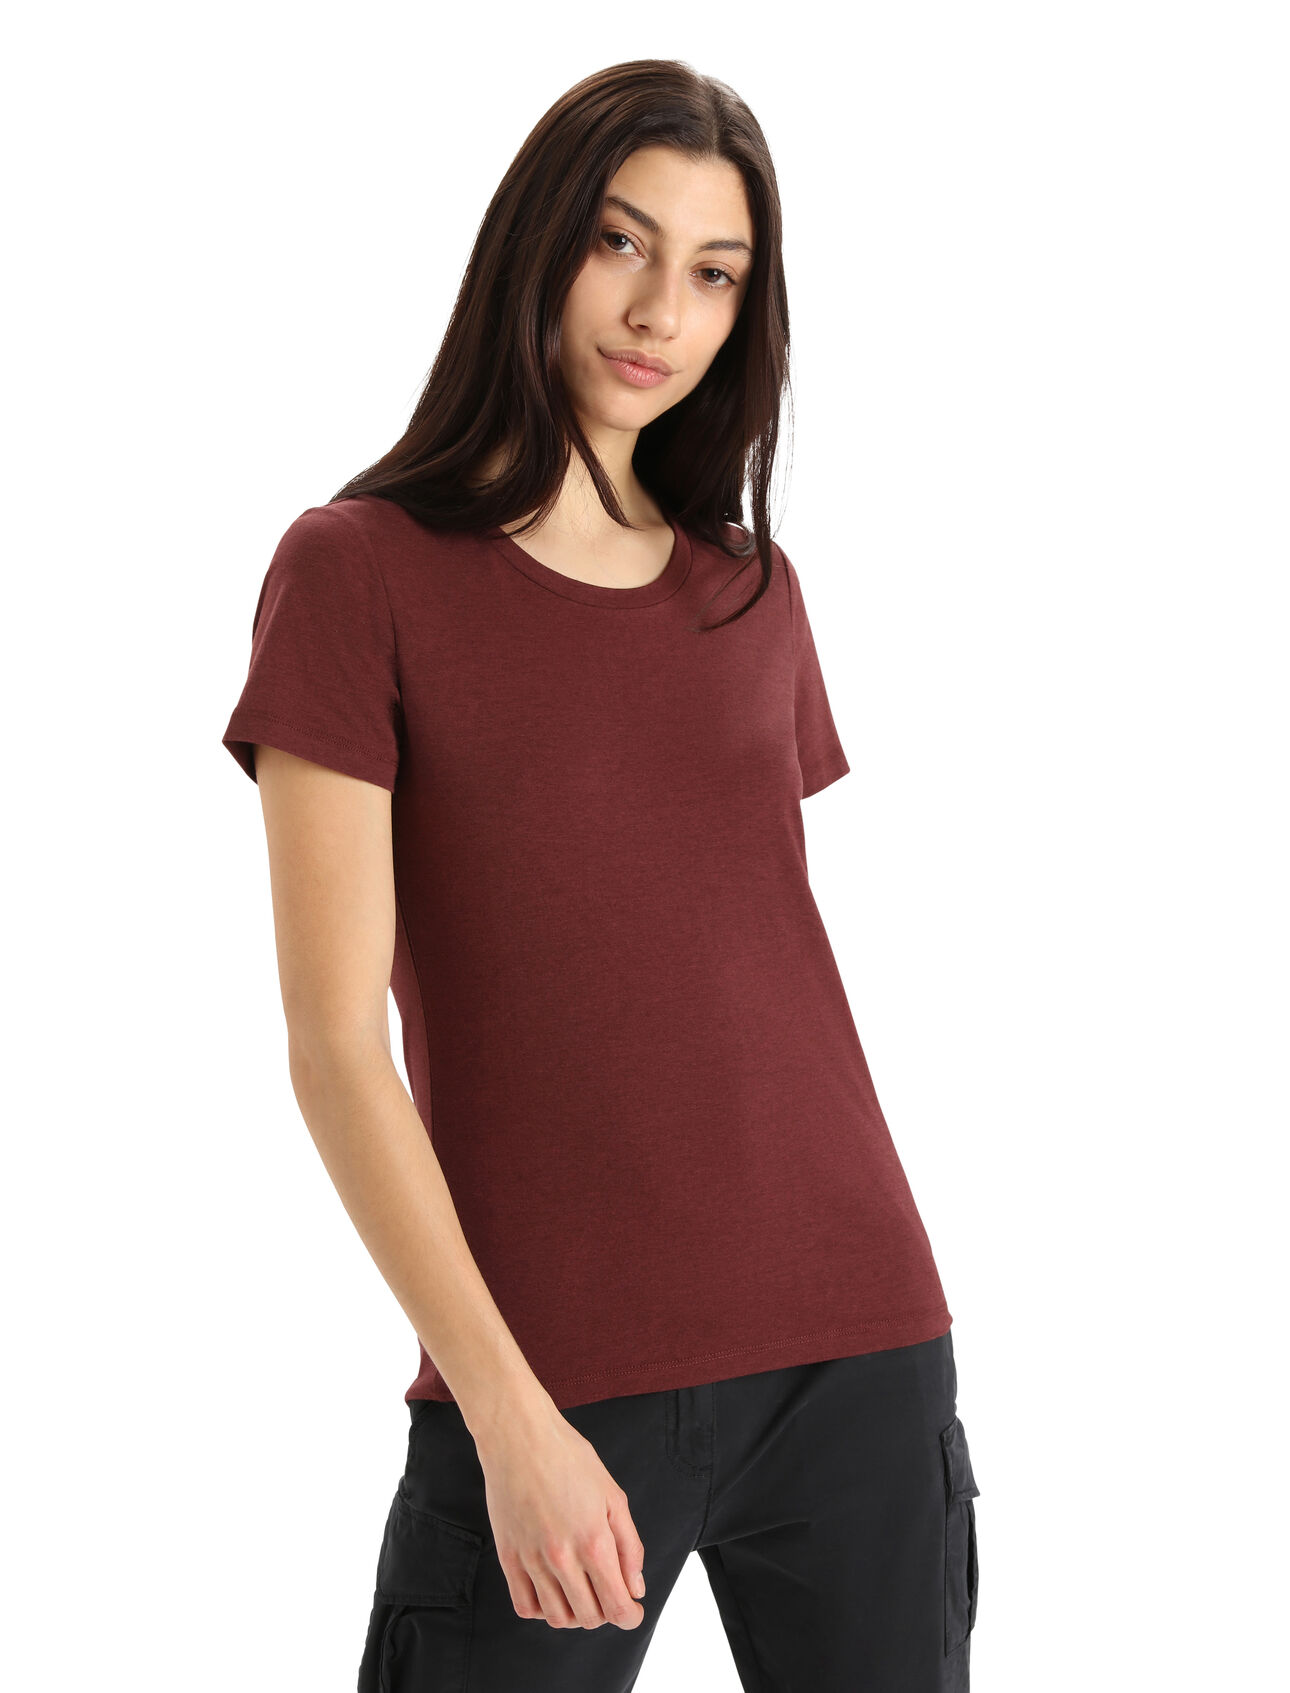 Womens Merino Central Classic Short Sleeve T-Shirt A versatile, everyday tee that goes anywhere in comfort, the Central Classic Short Sleeve Tee features a sustainable blend of natural merino wool and soft organic cotton.